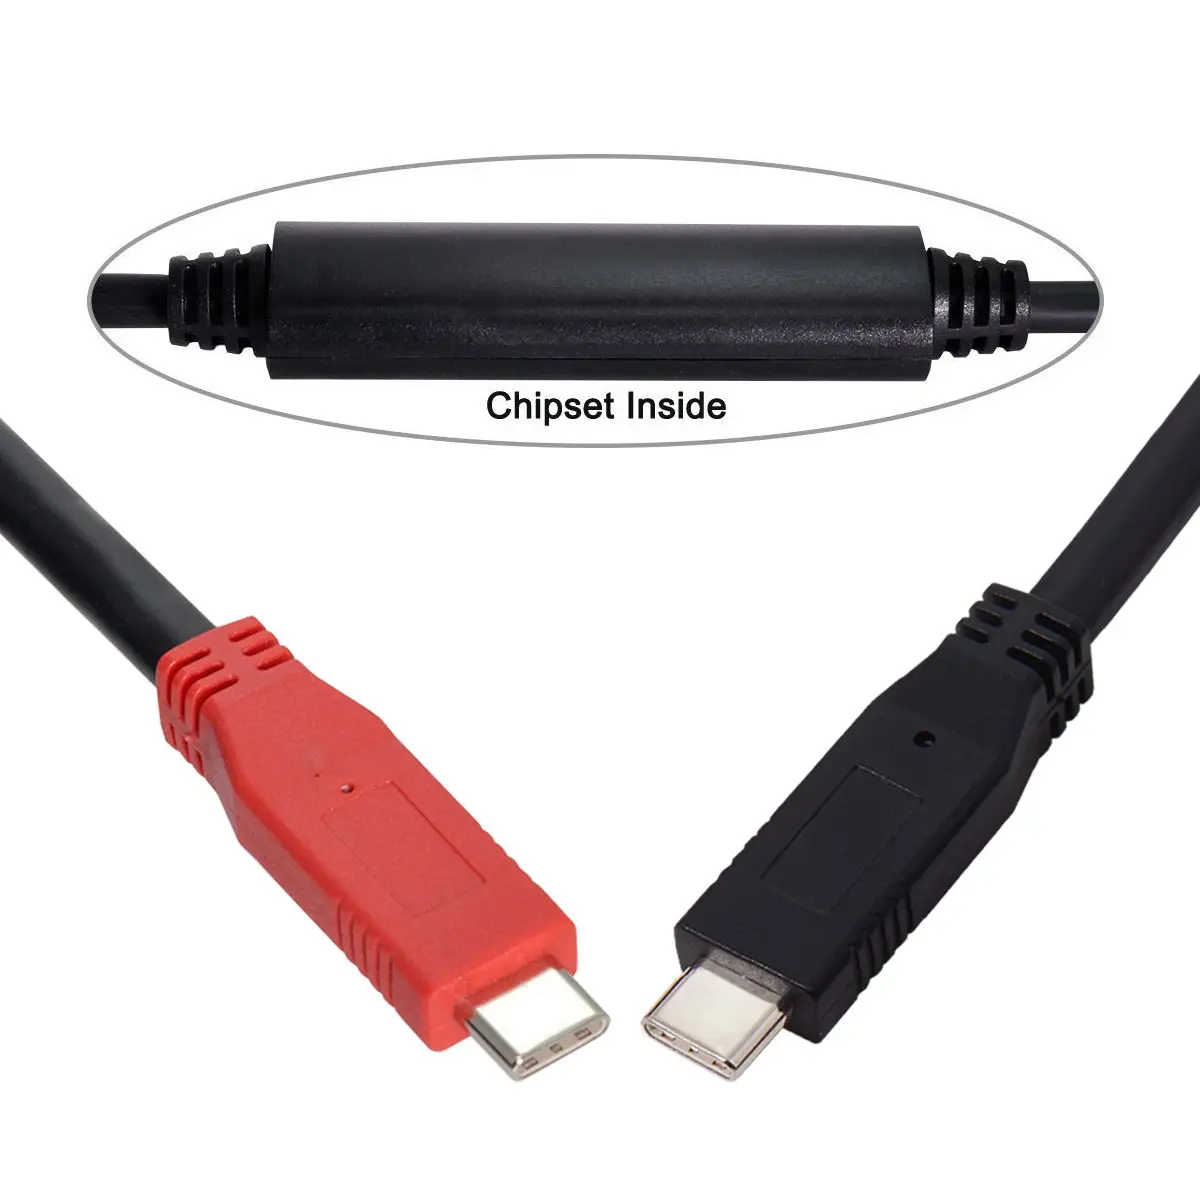 

CY 8m USB-C Type-C to USB-C 5Gbps Gen1 Chipset Repeater Data Cable Single-Way Transfer for Industrial Camera Laptop PC&Disk